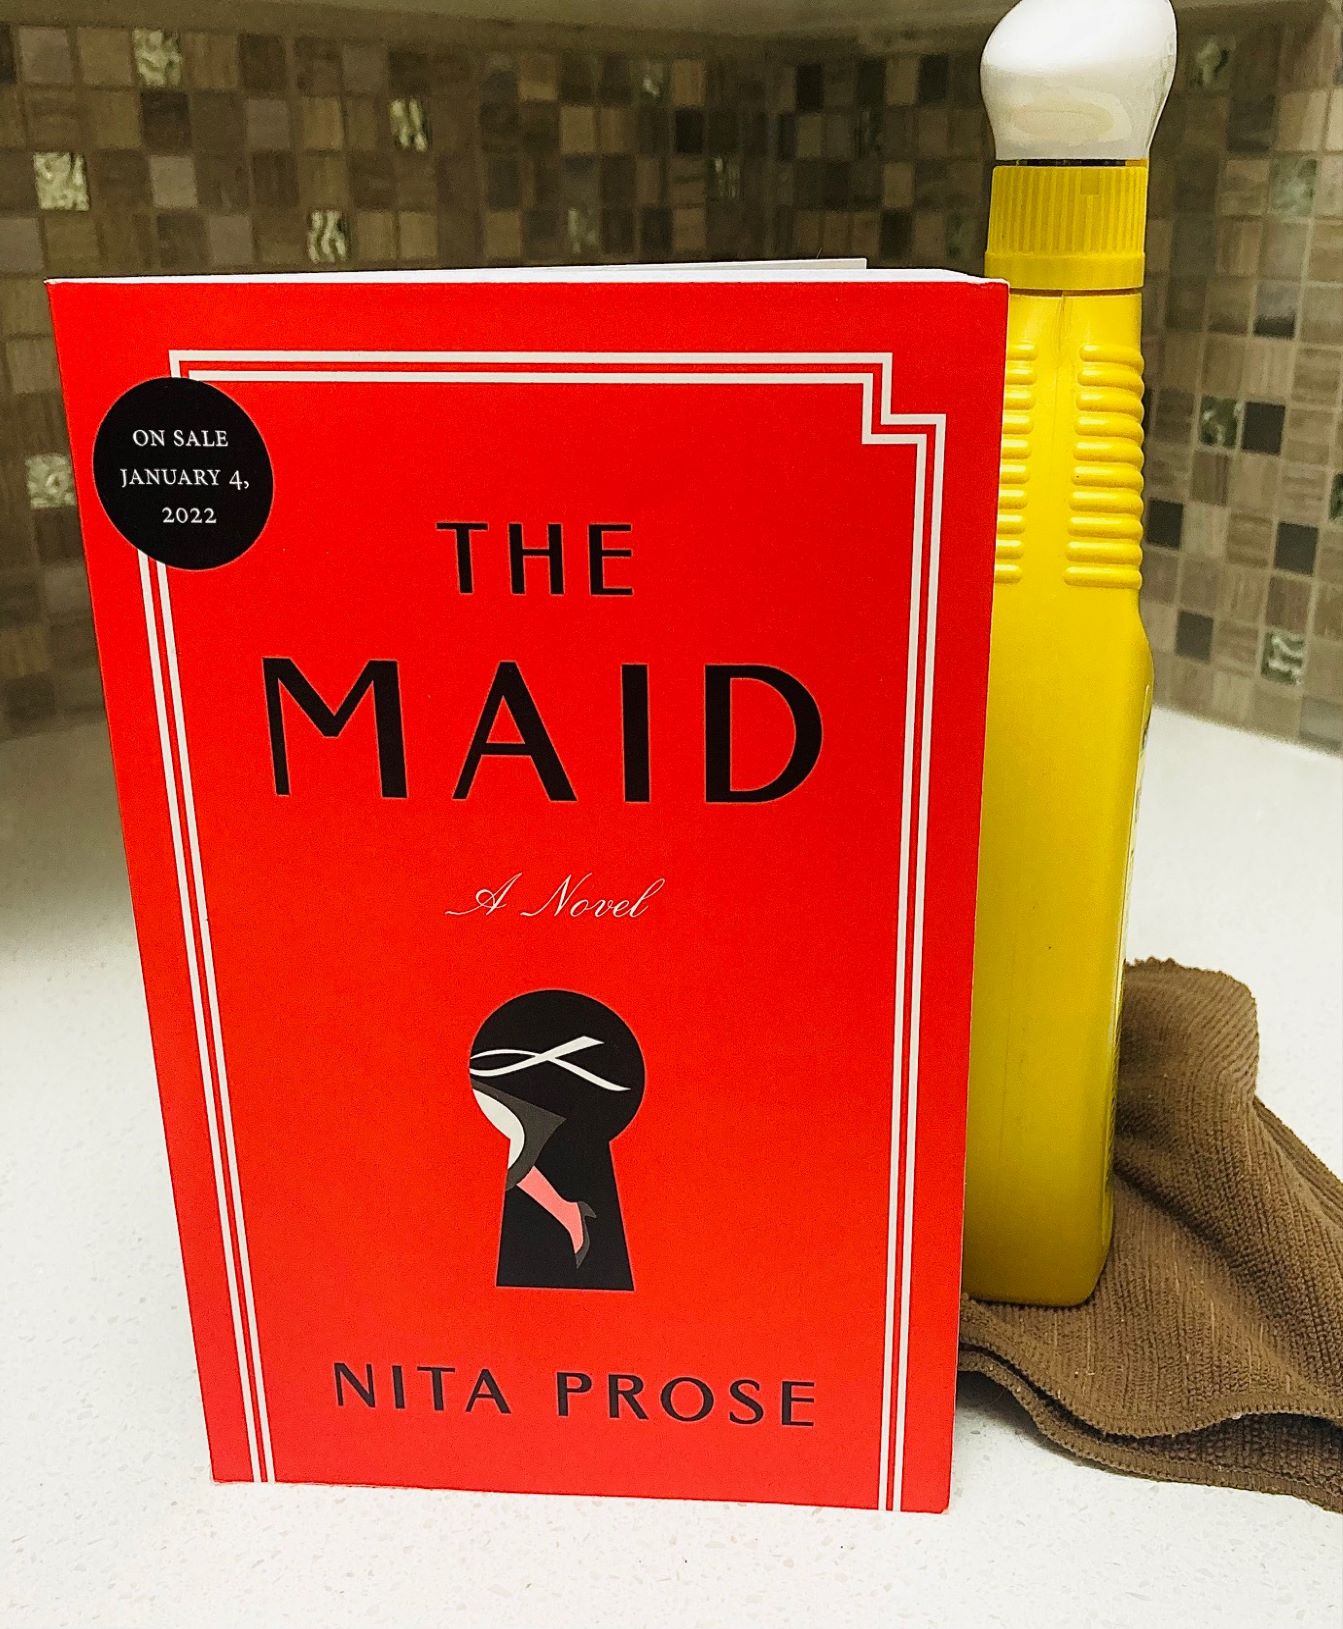 The Maid by Nita Prose book next to a yellow spray bottle and brown cleaning cloth on a white countertop